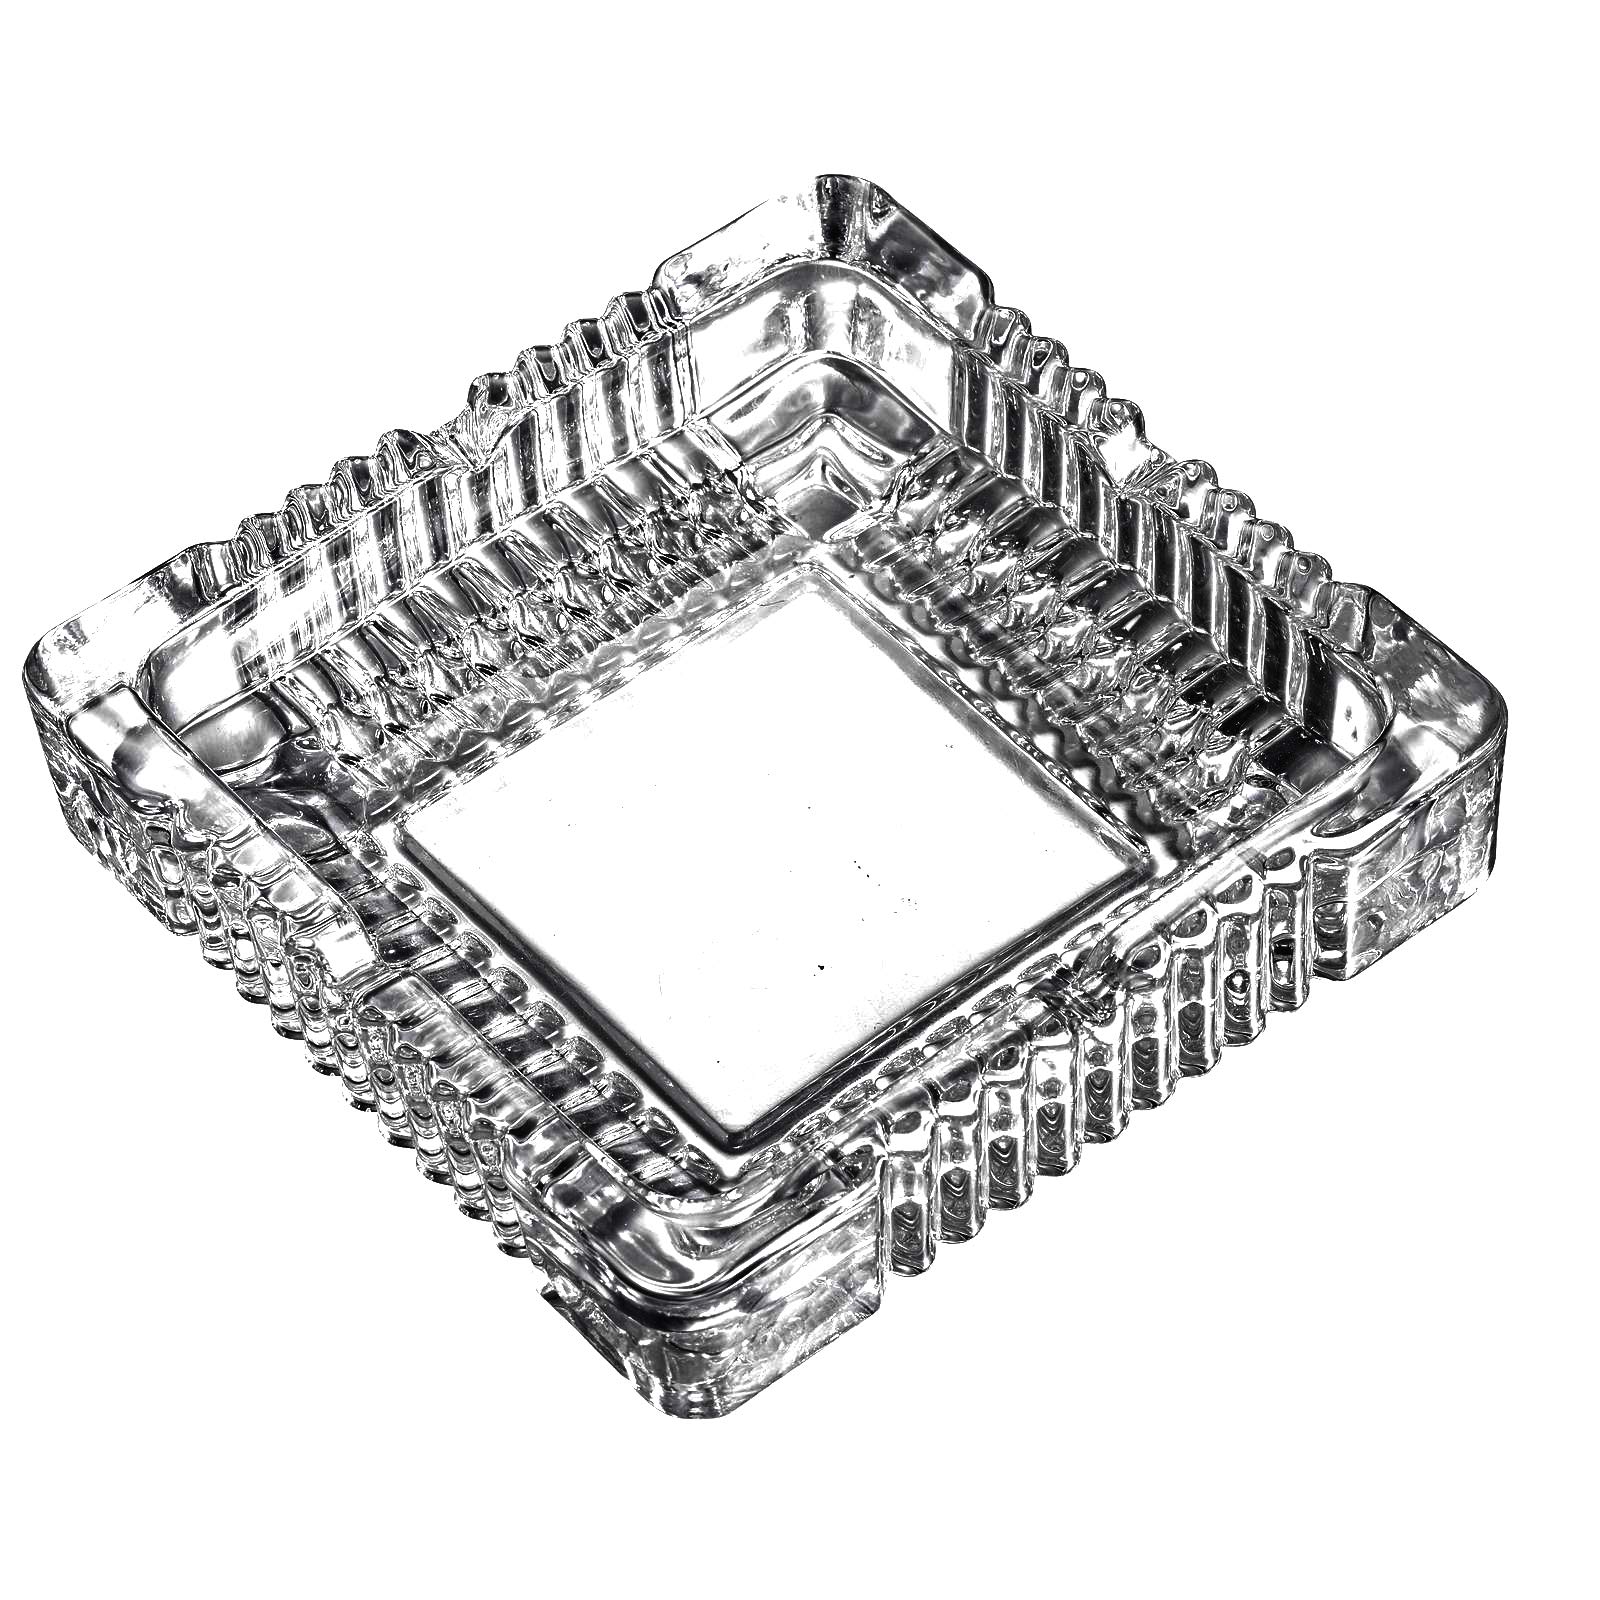 Amlong Crystal Large Classic Square Ashtray 6 inch x 6 inch